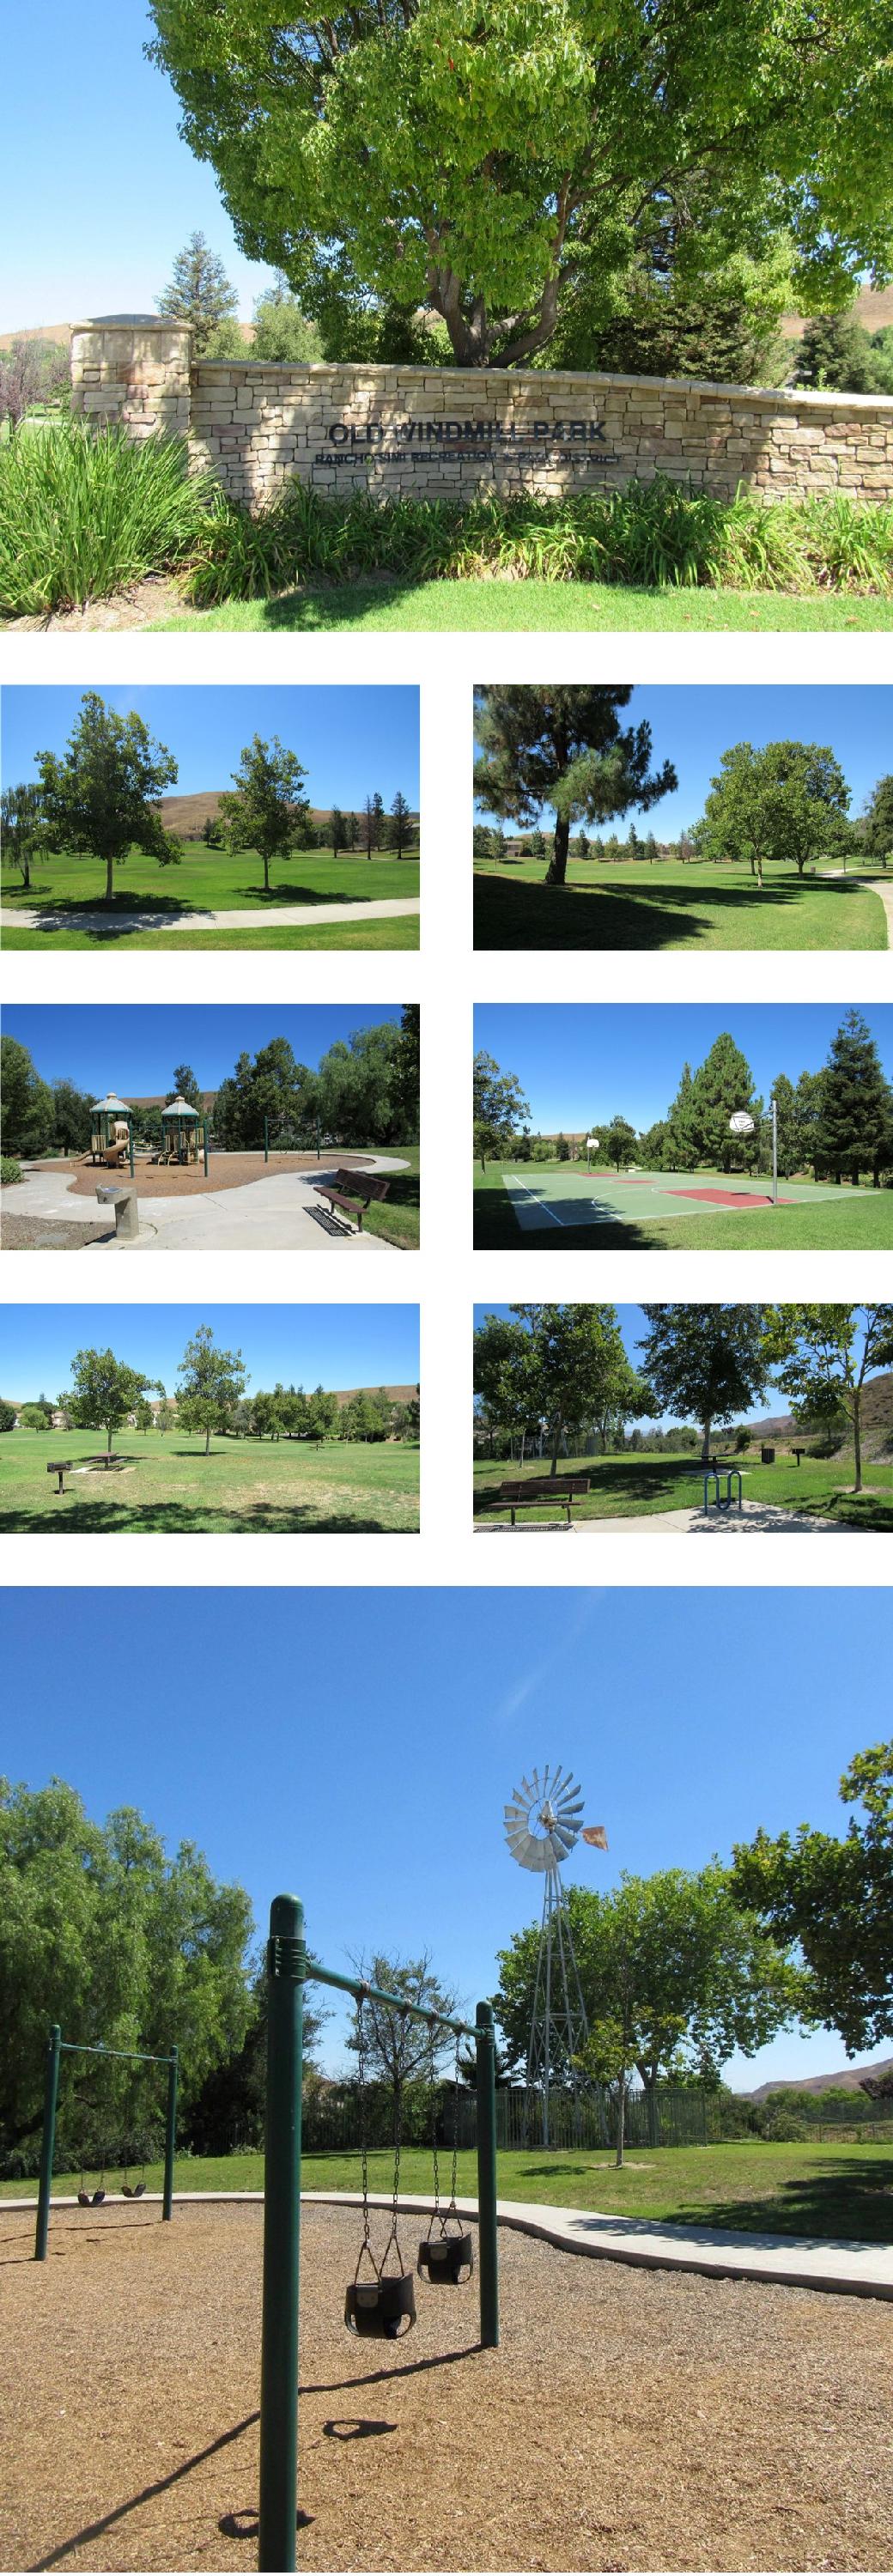 Old Windmill Park Collage